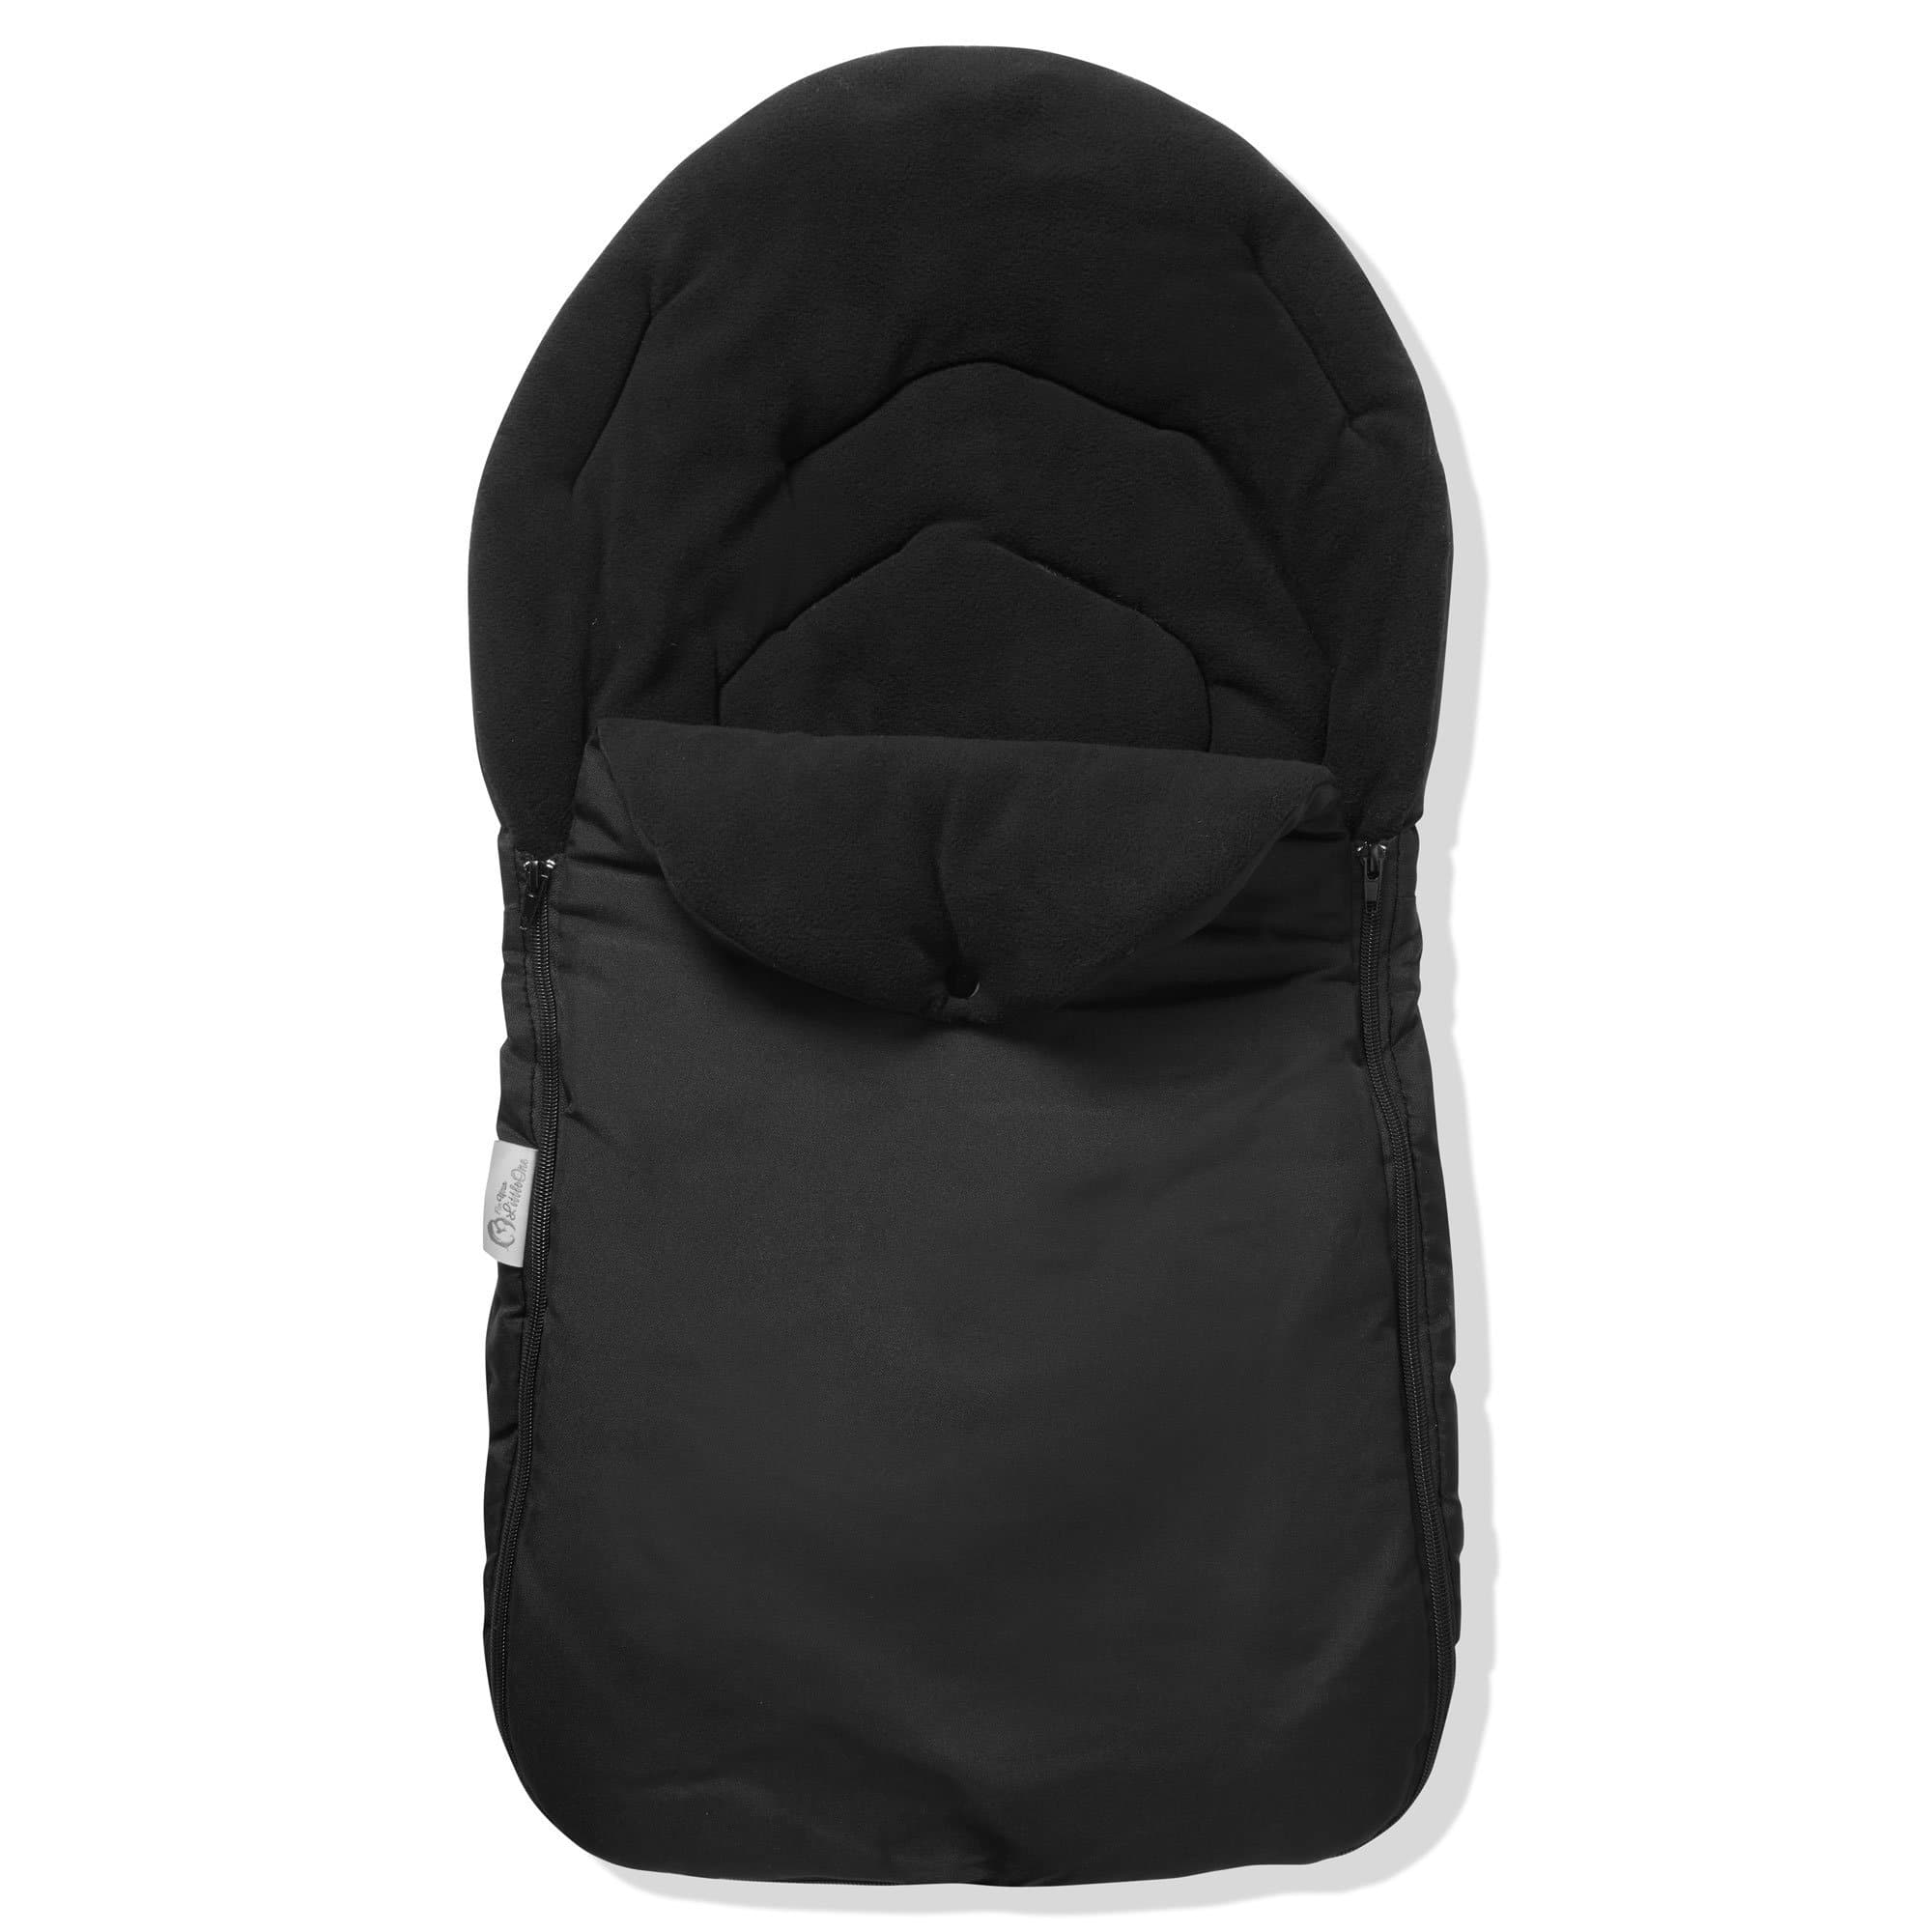 Car Seat Footmuff / Cosy Toes Compatible with Infababy - Black / Fits All Models | For Your Little One